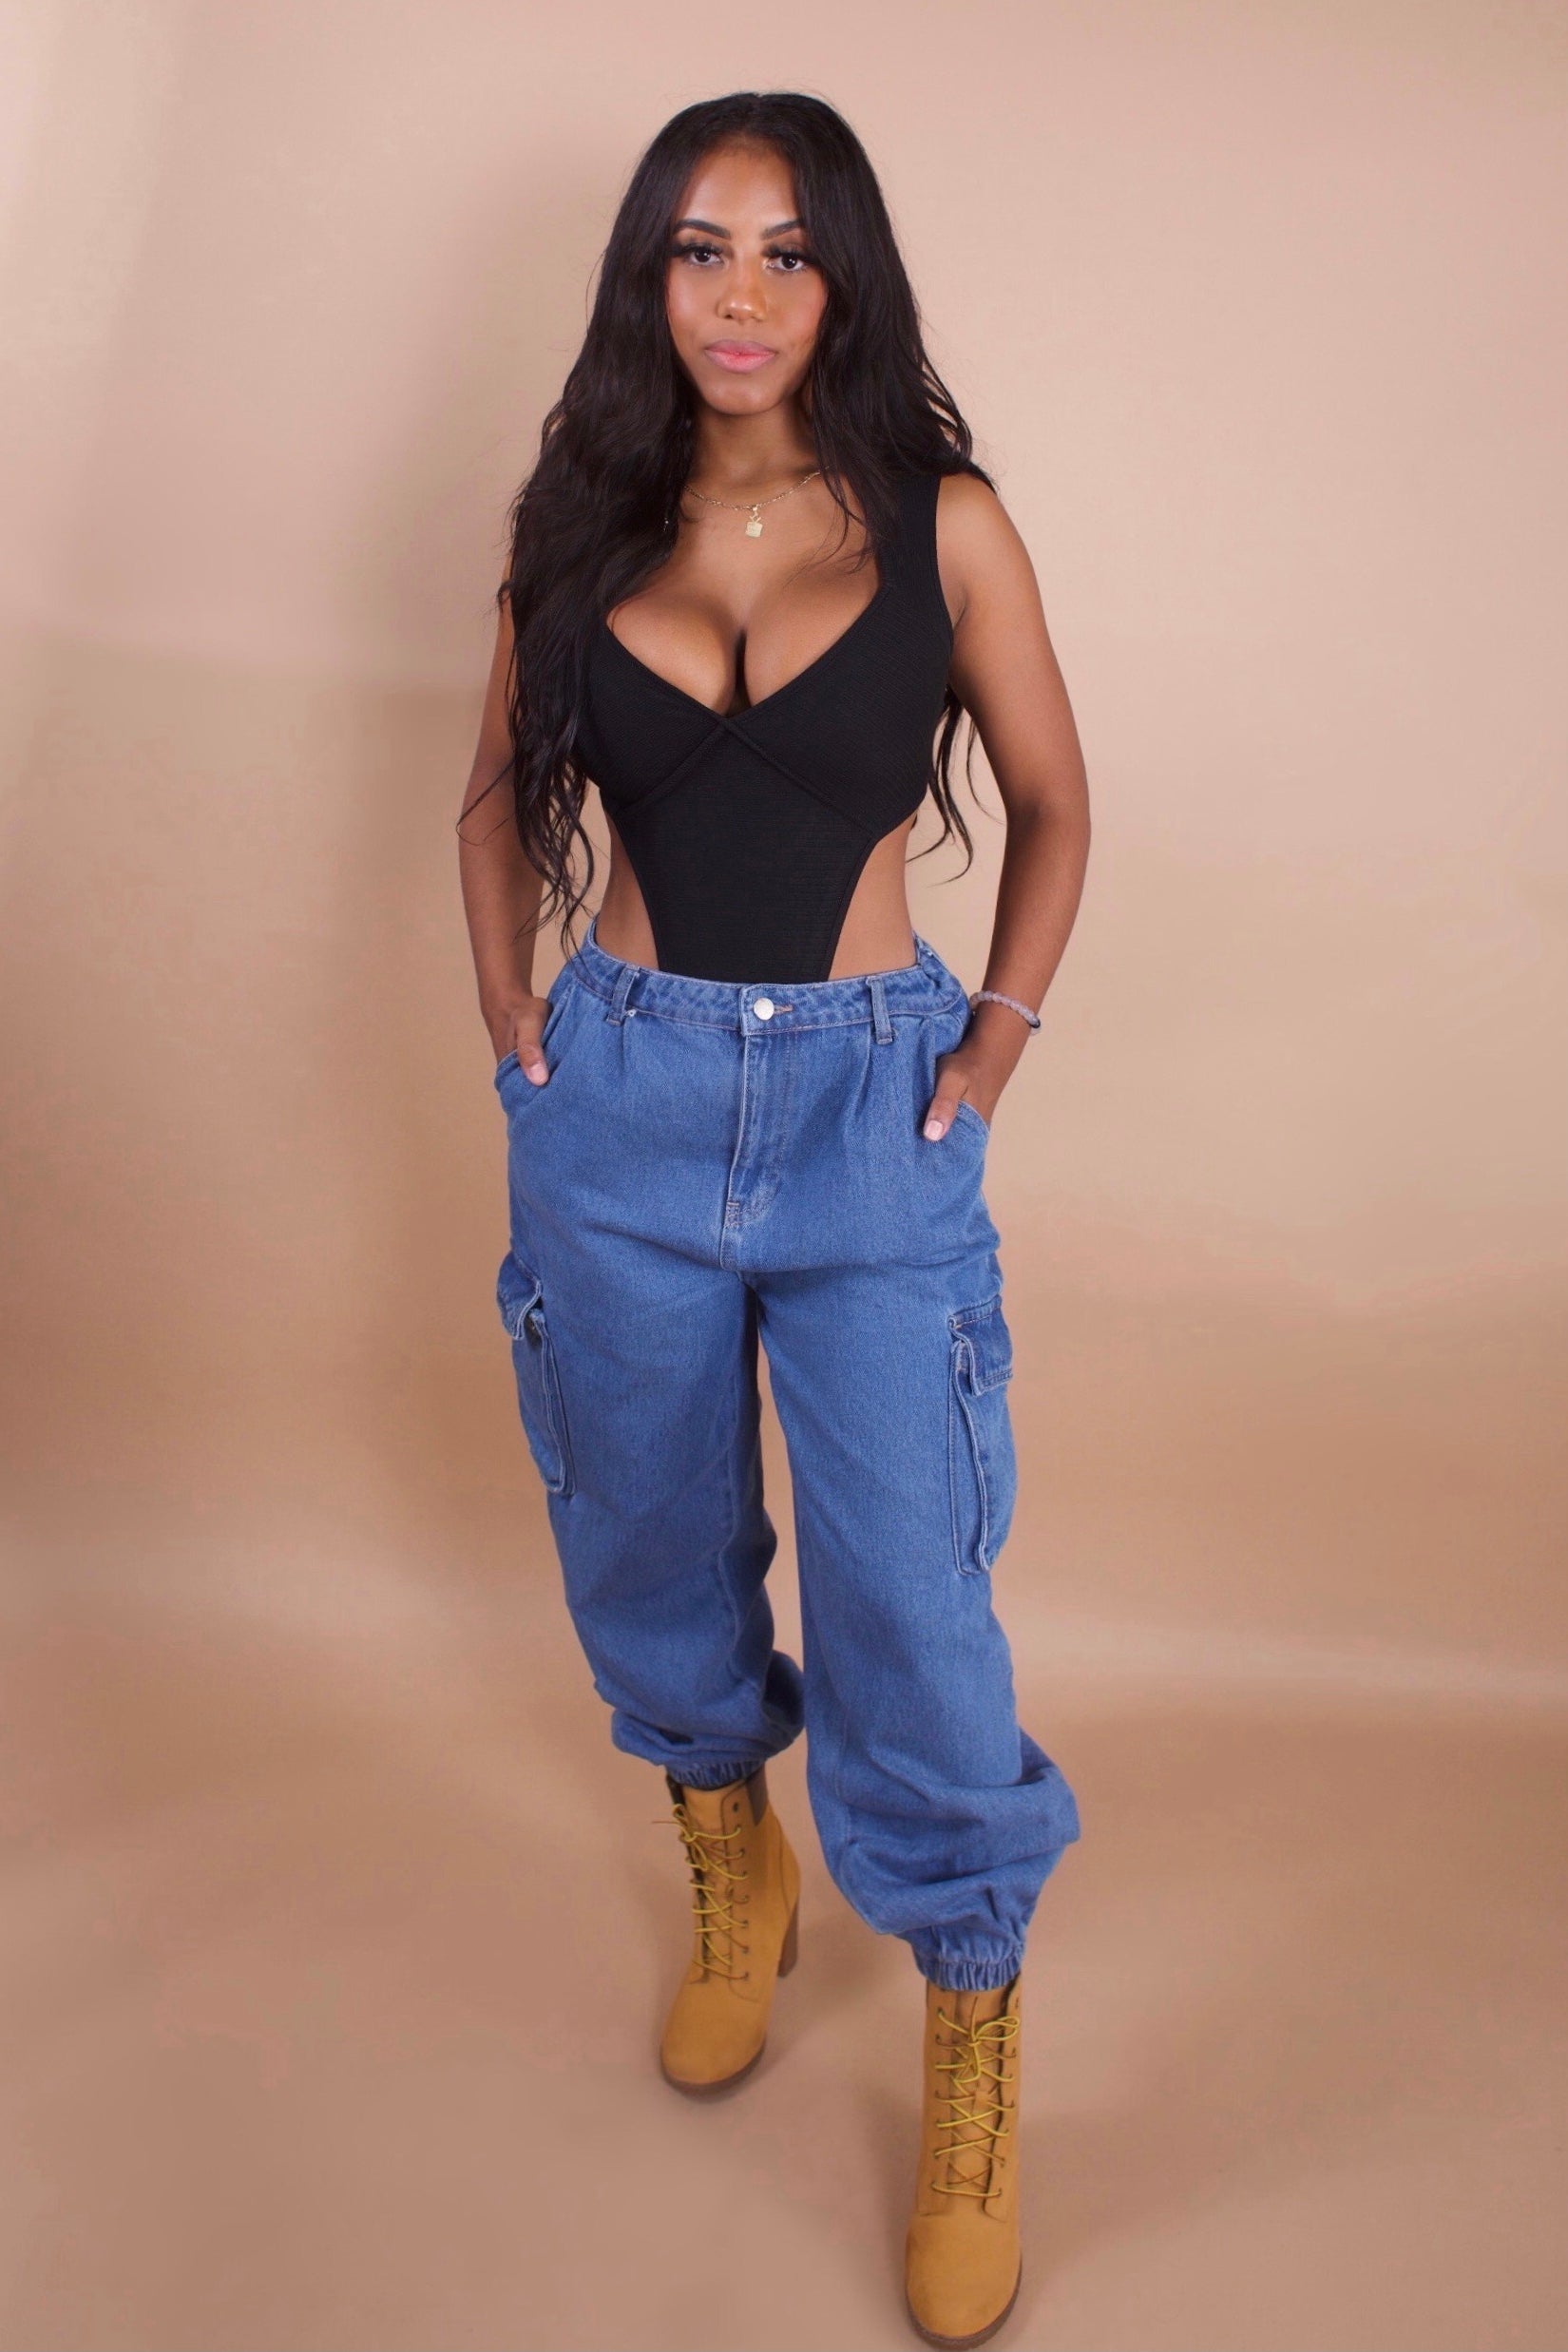 The FIX - Drip in this high-cut bodysuit & jeans for that